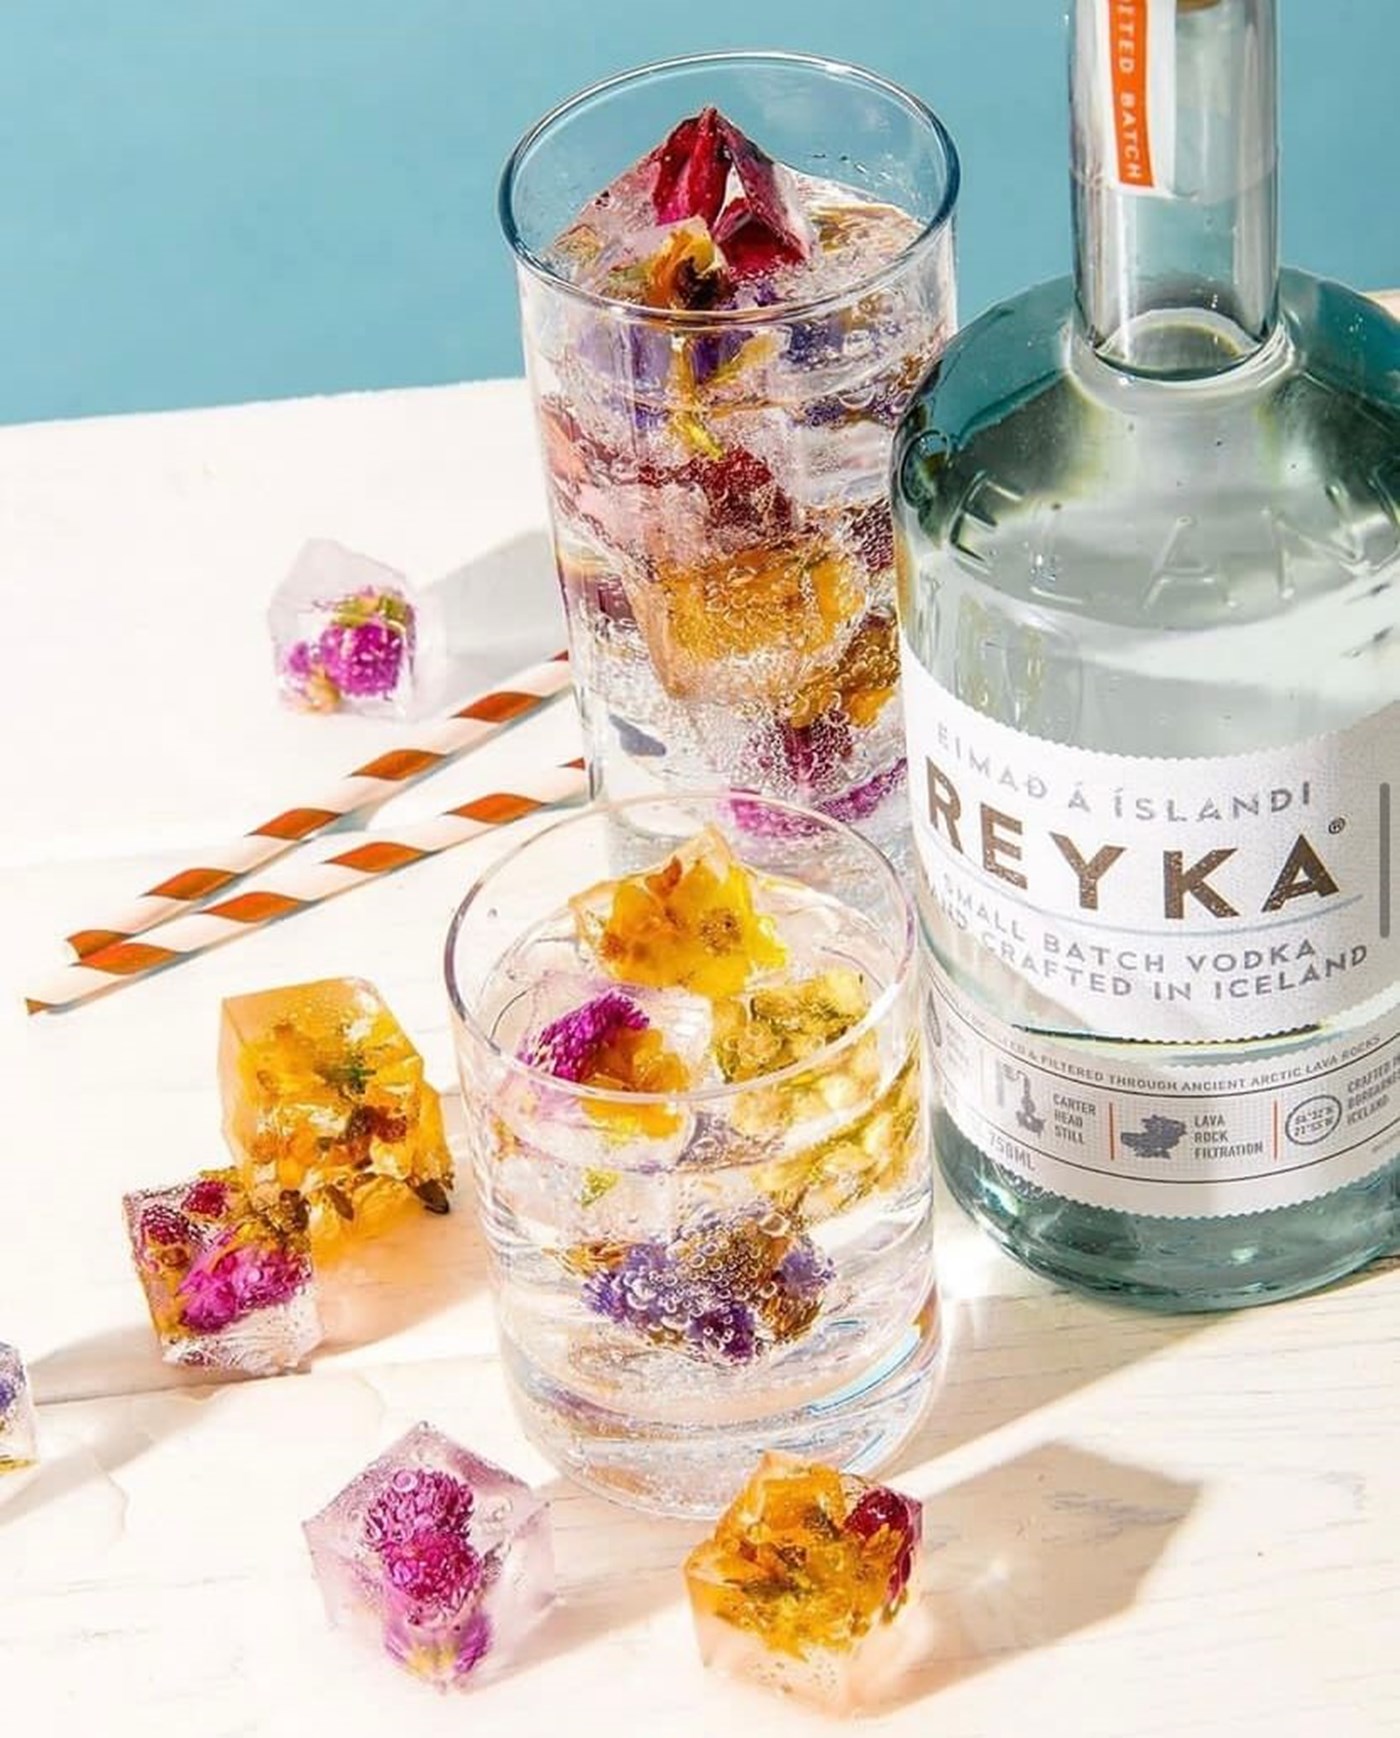 A bottle of reyka vodka next to a mixed drink with flower filled ice cubes spread across the table